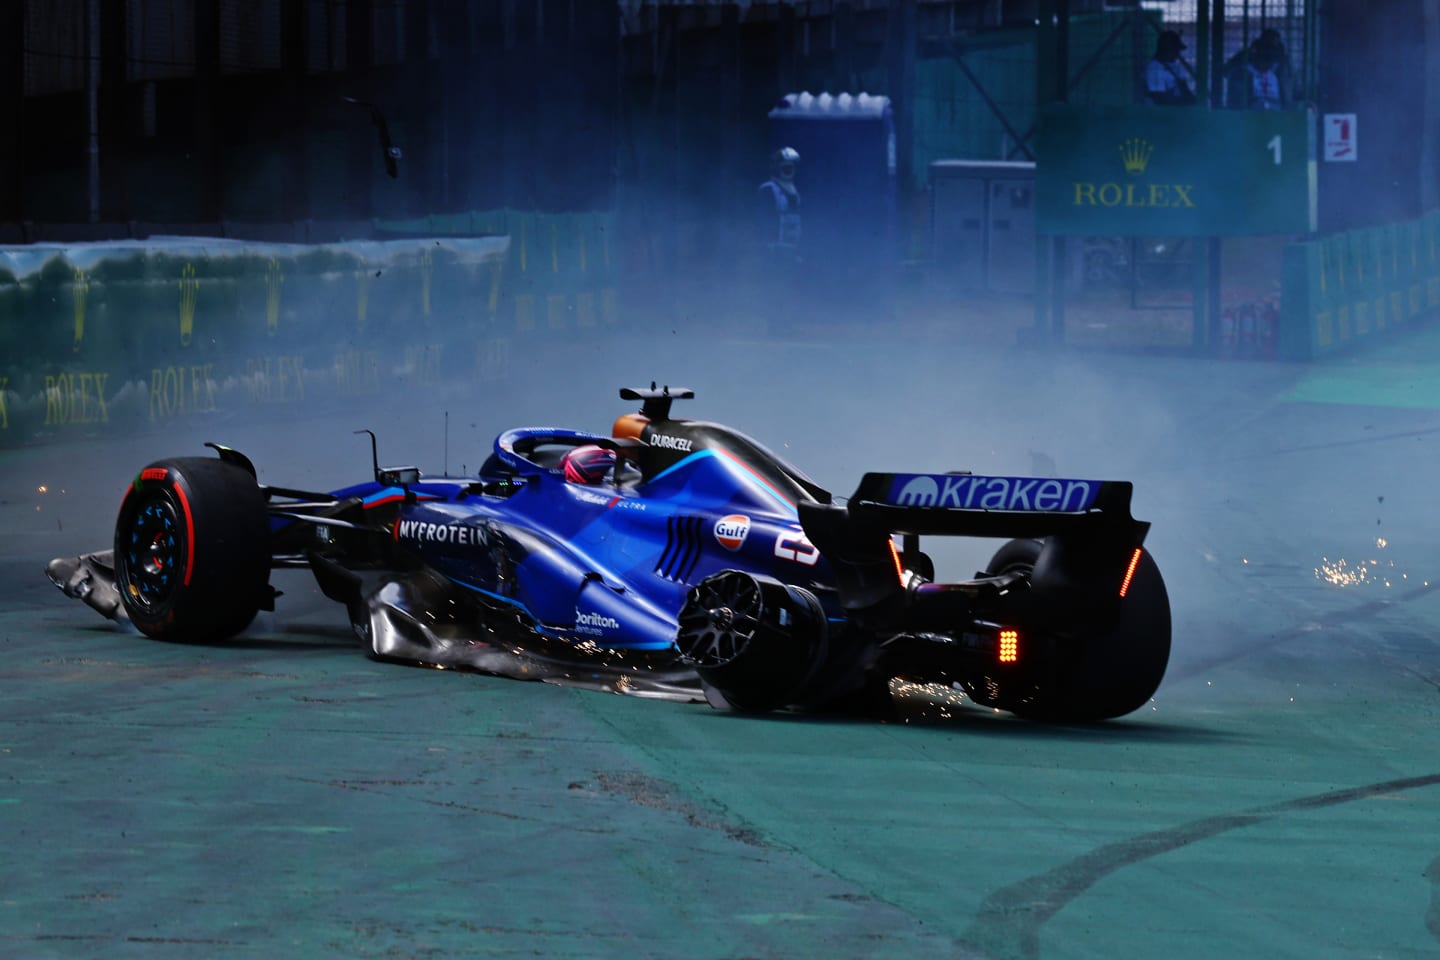 Albon's car was left in pieces, but fortunately no drivers were hurt in the incident